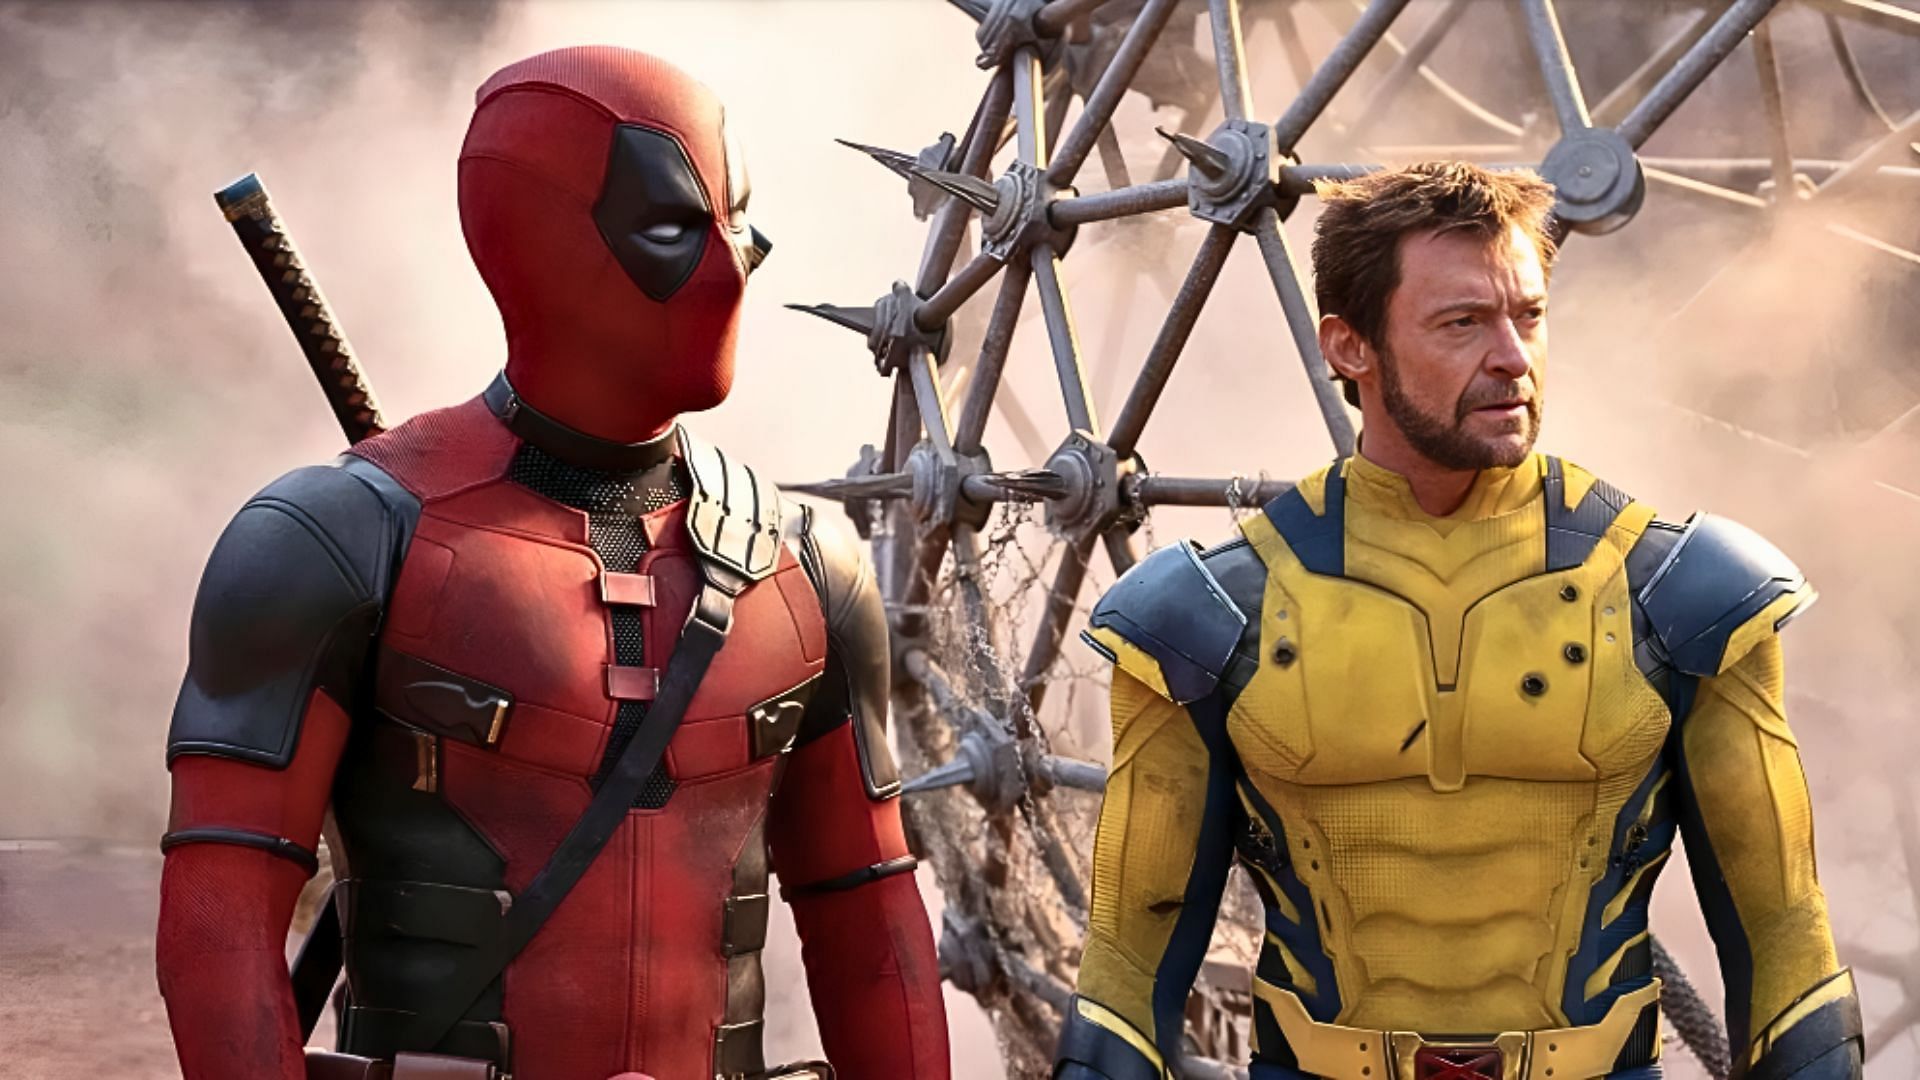 Ryan Reynolds (left) and Hugh Jackman (right) in and as Deadpool &amp; Wolverine (Image via Marvel)